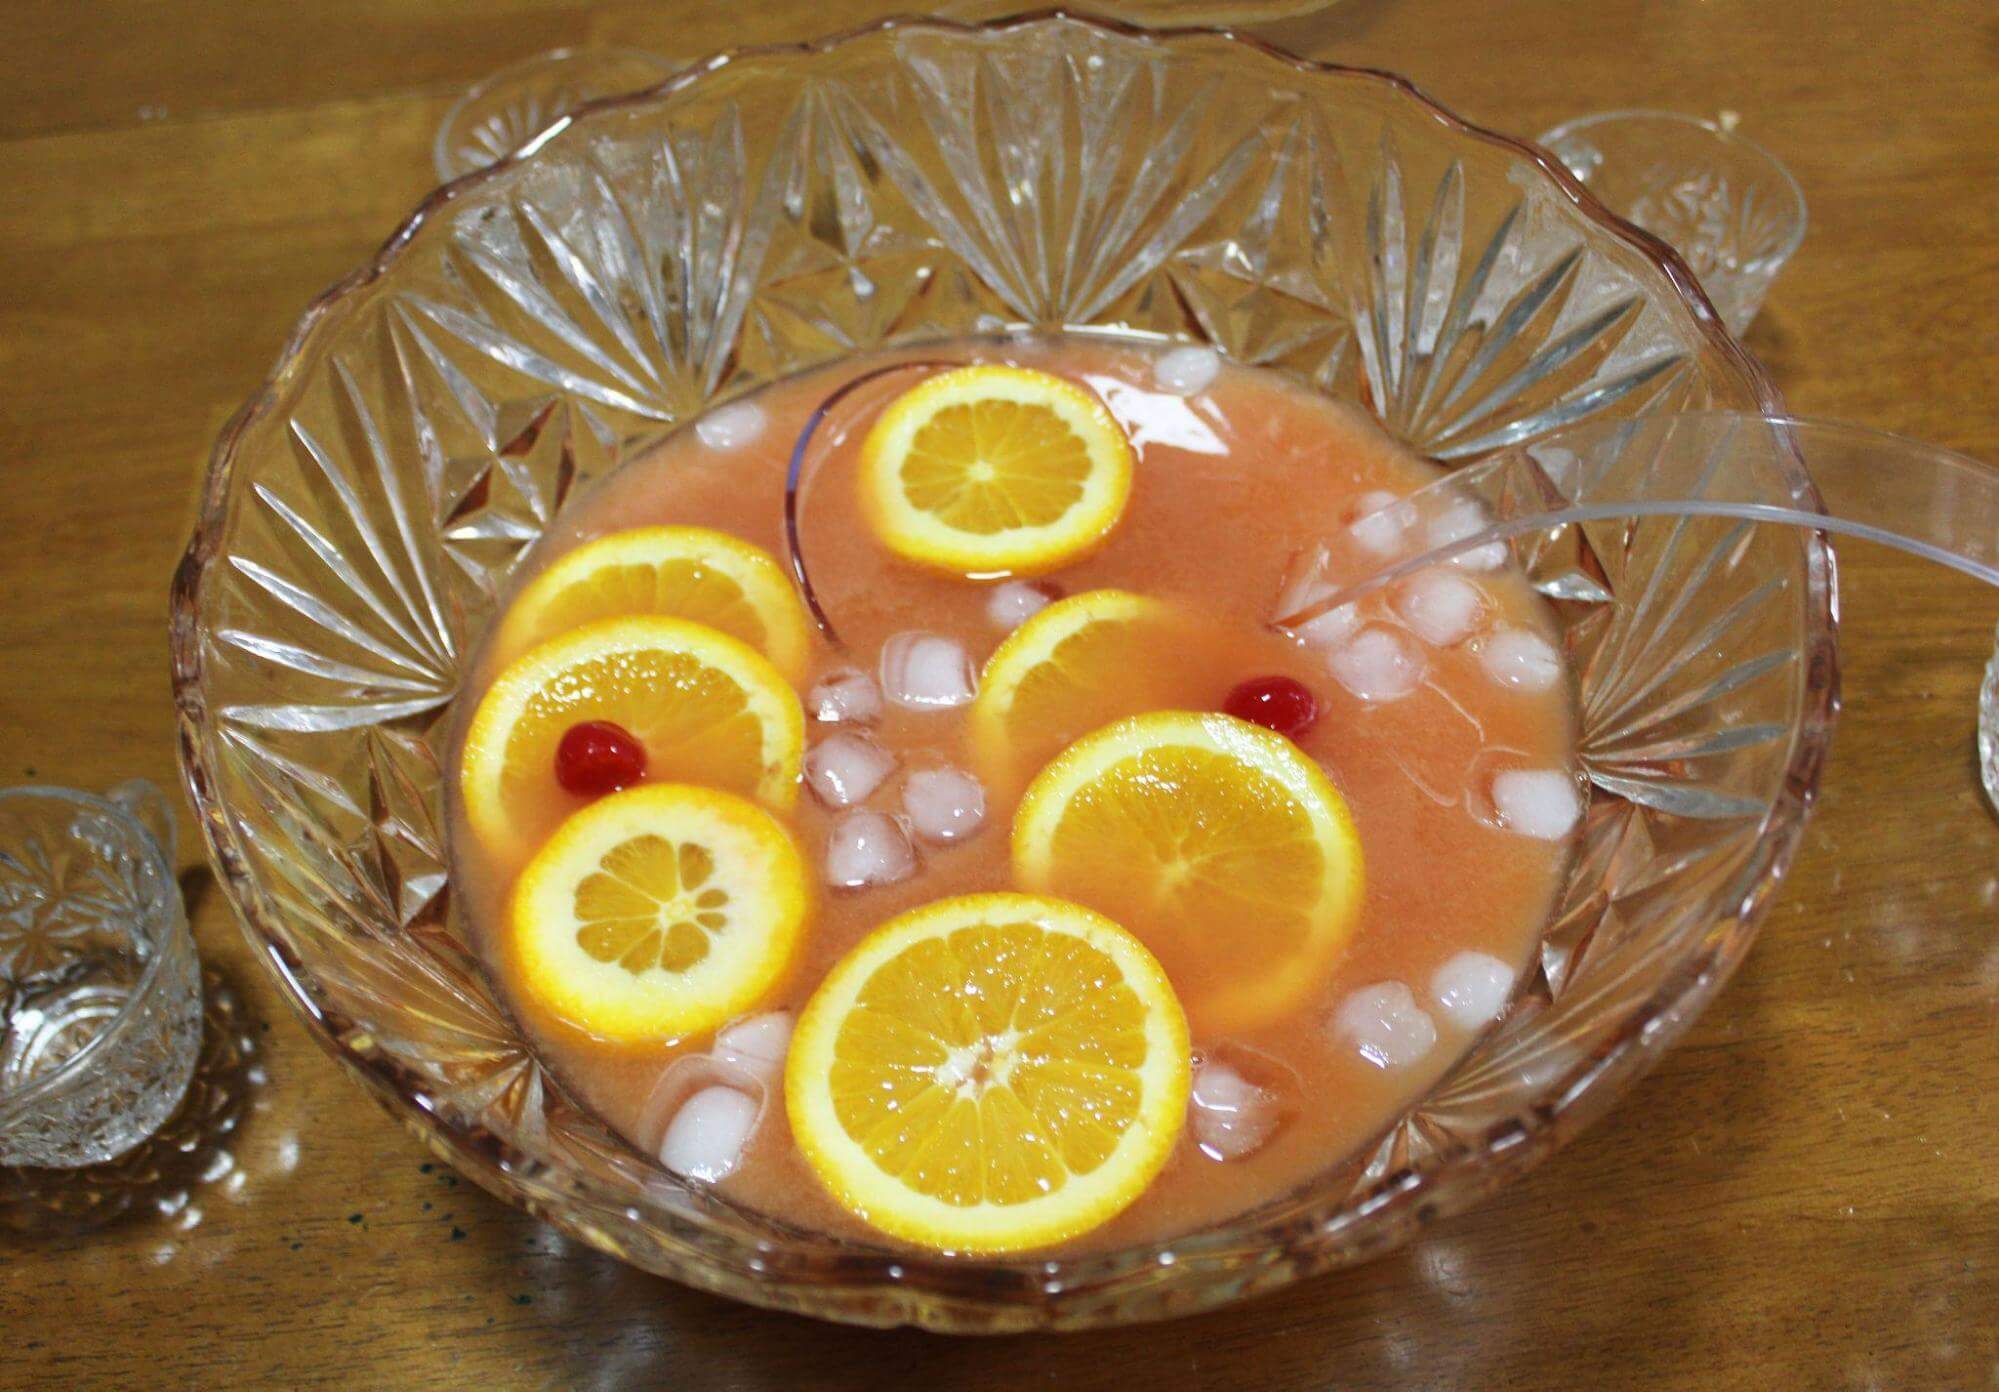 Punch bowl of Lucy's Prohibition Punch with ice, lemon slices and cherries.